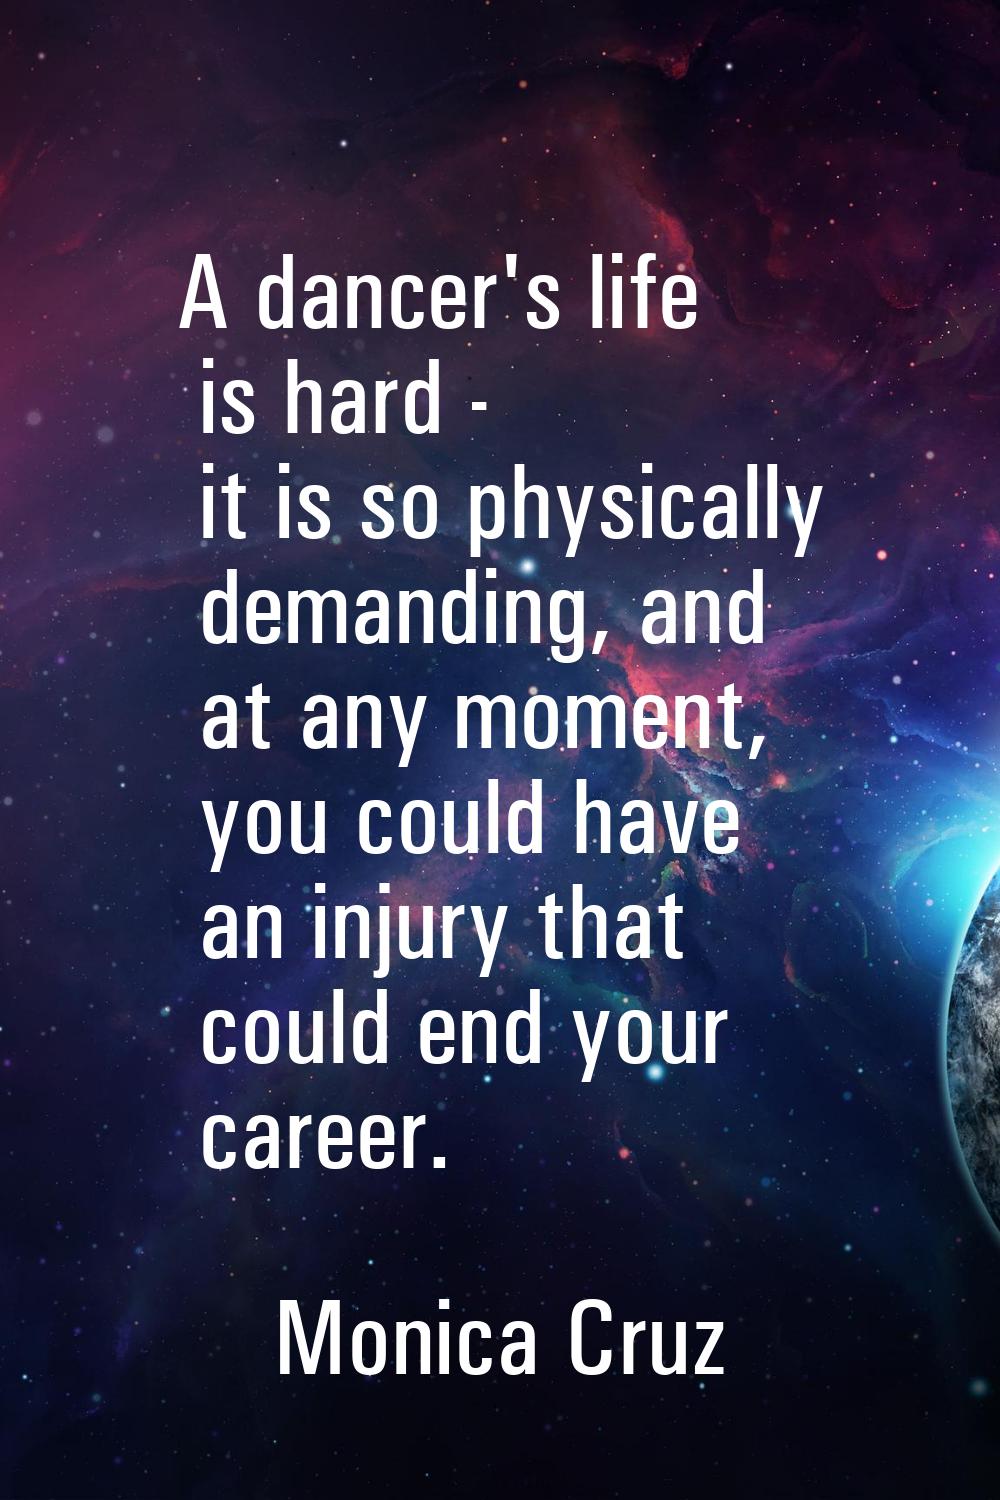 A dancer's life is hard - it is so physically demanding, and at any moment, you could have an injur